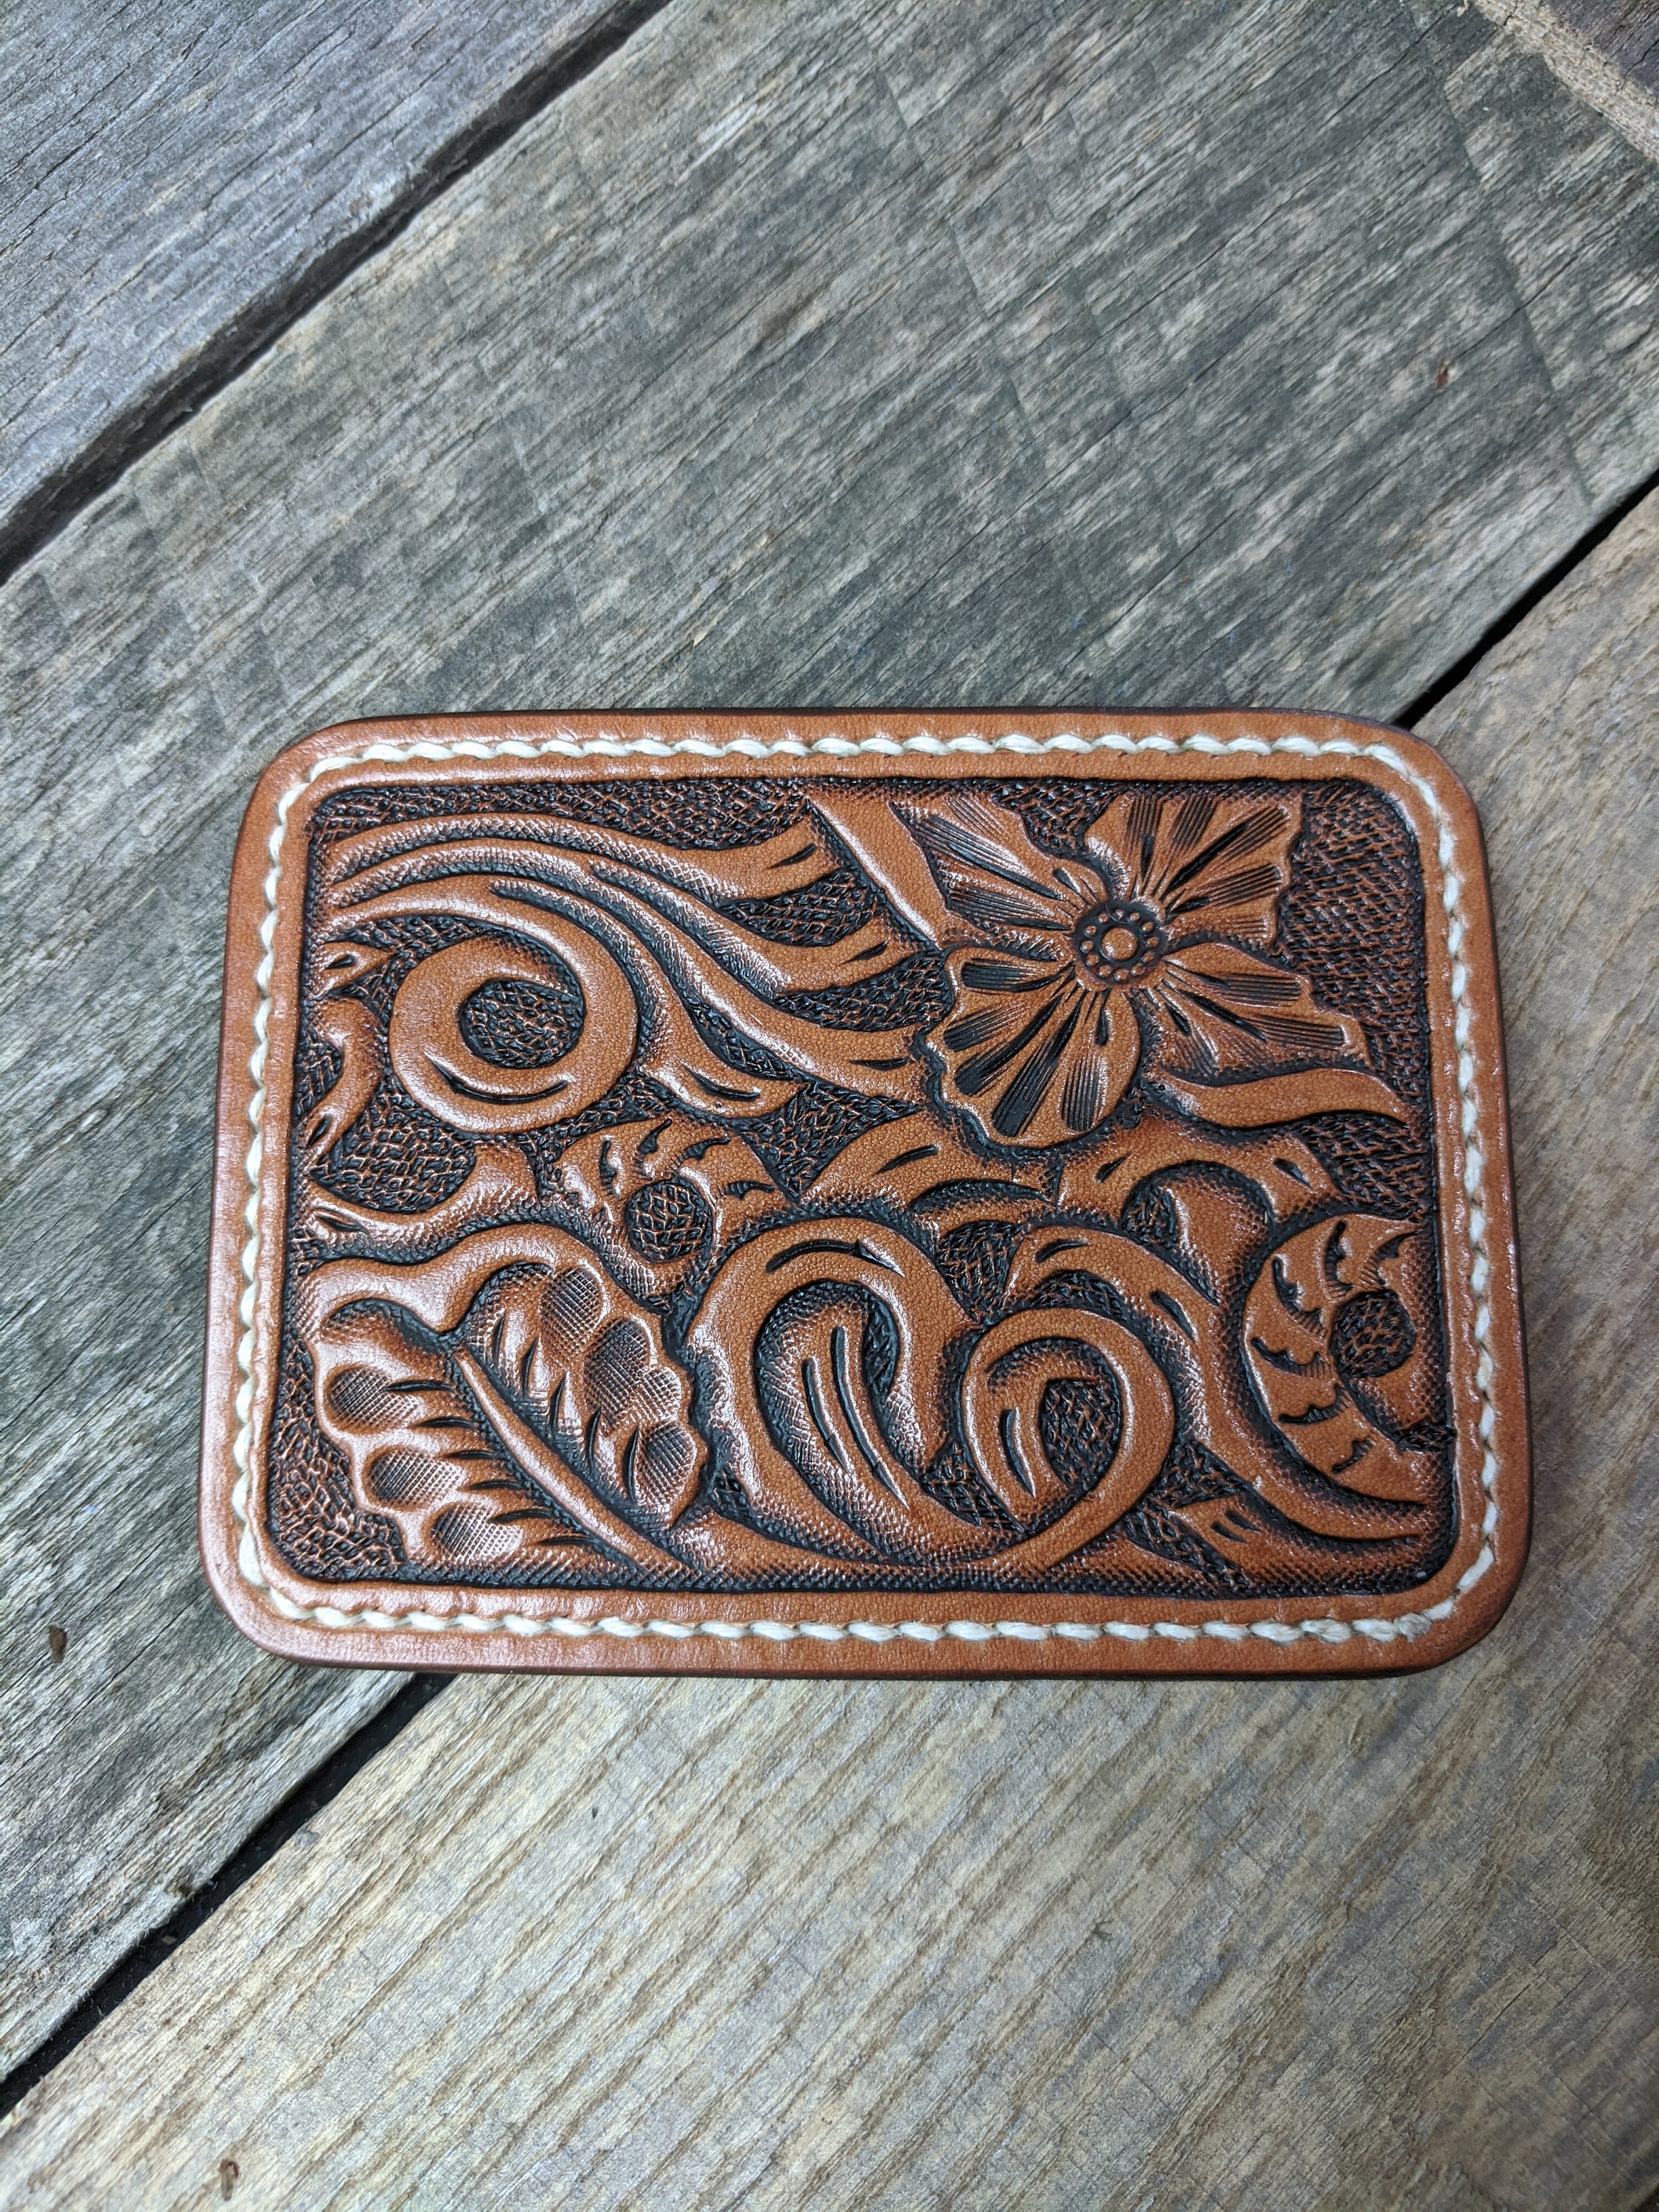 Hand Tooled Leather Front Pocket Wallet with Western Flower Art, Slim ...